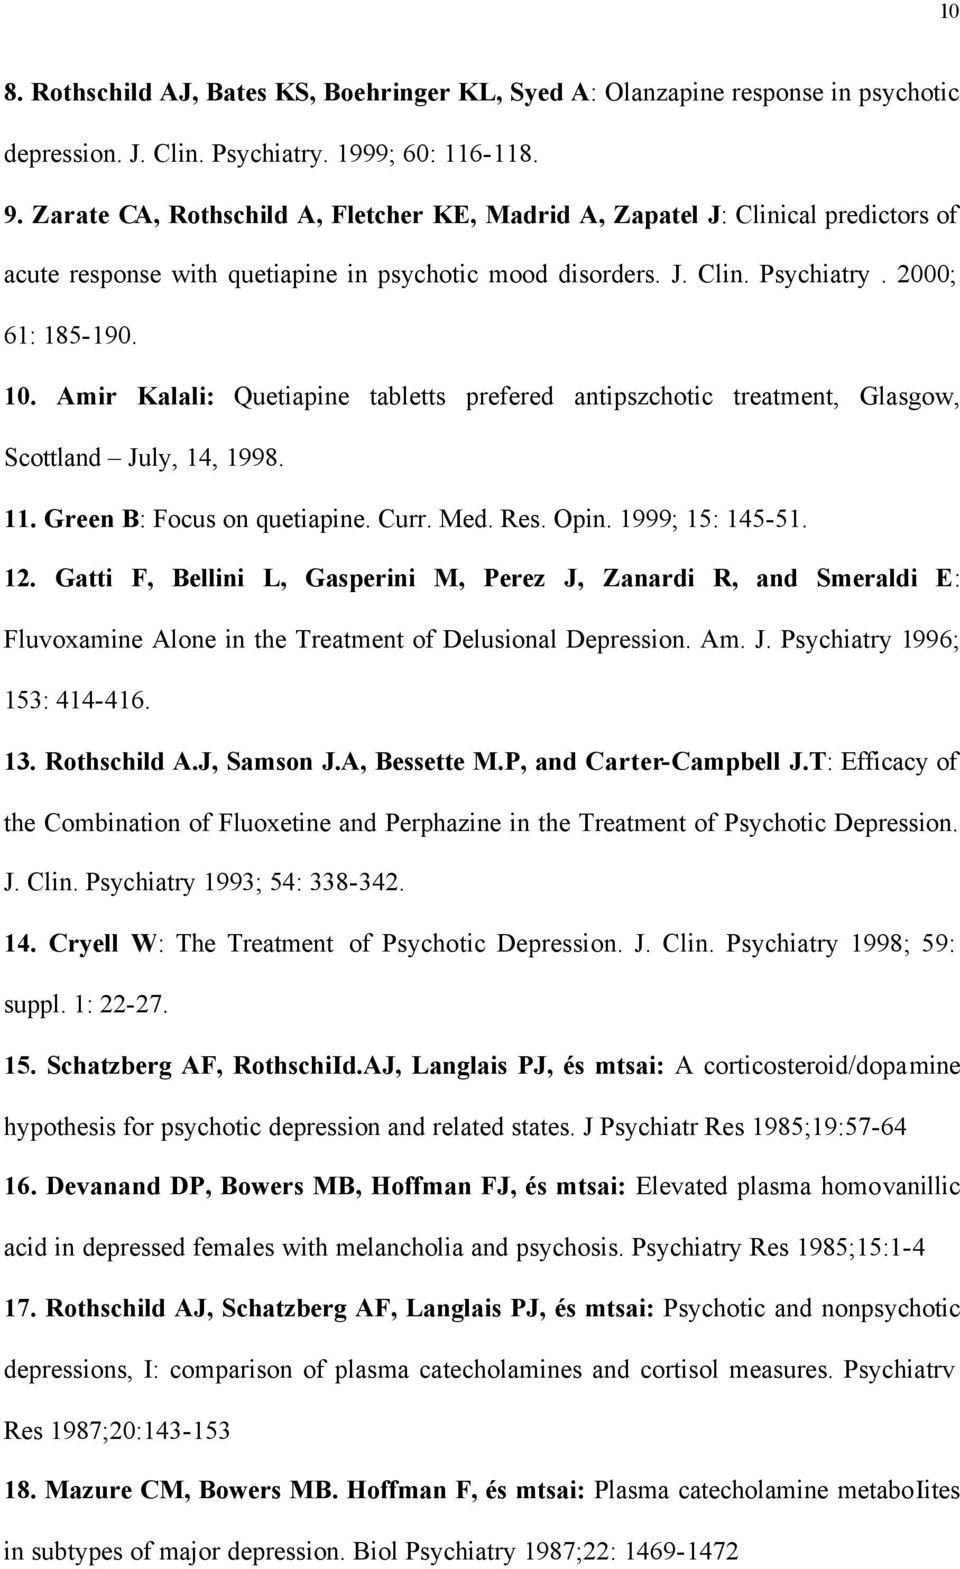 Amir Kalali: Quetiapine tabletts prefered antipszchotic treatment, Glasgow, Scottland July, 14, 1998. 11. Green B: Focus on quetiapine. Curr. Med. Res. Opin. 1999; 15: 145-51. 12.